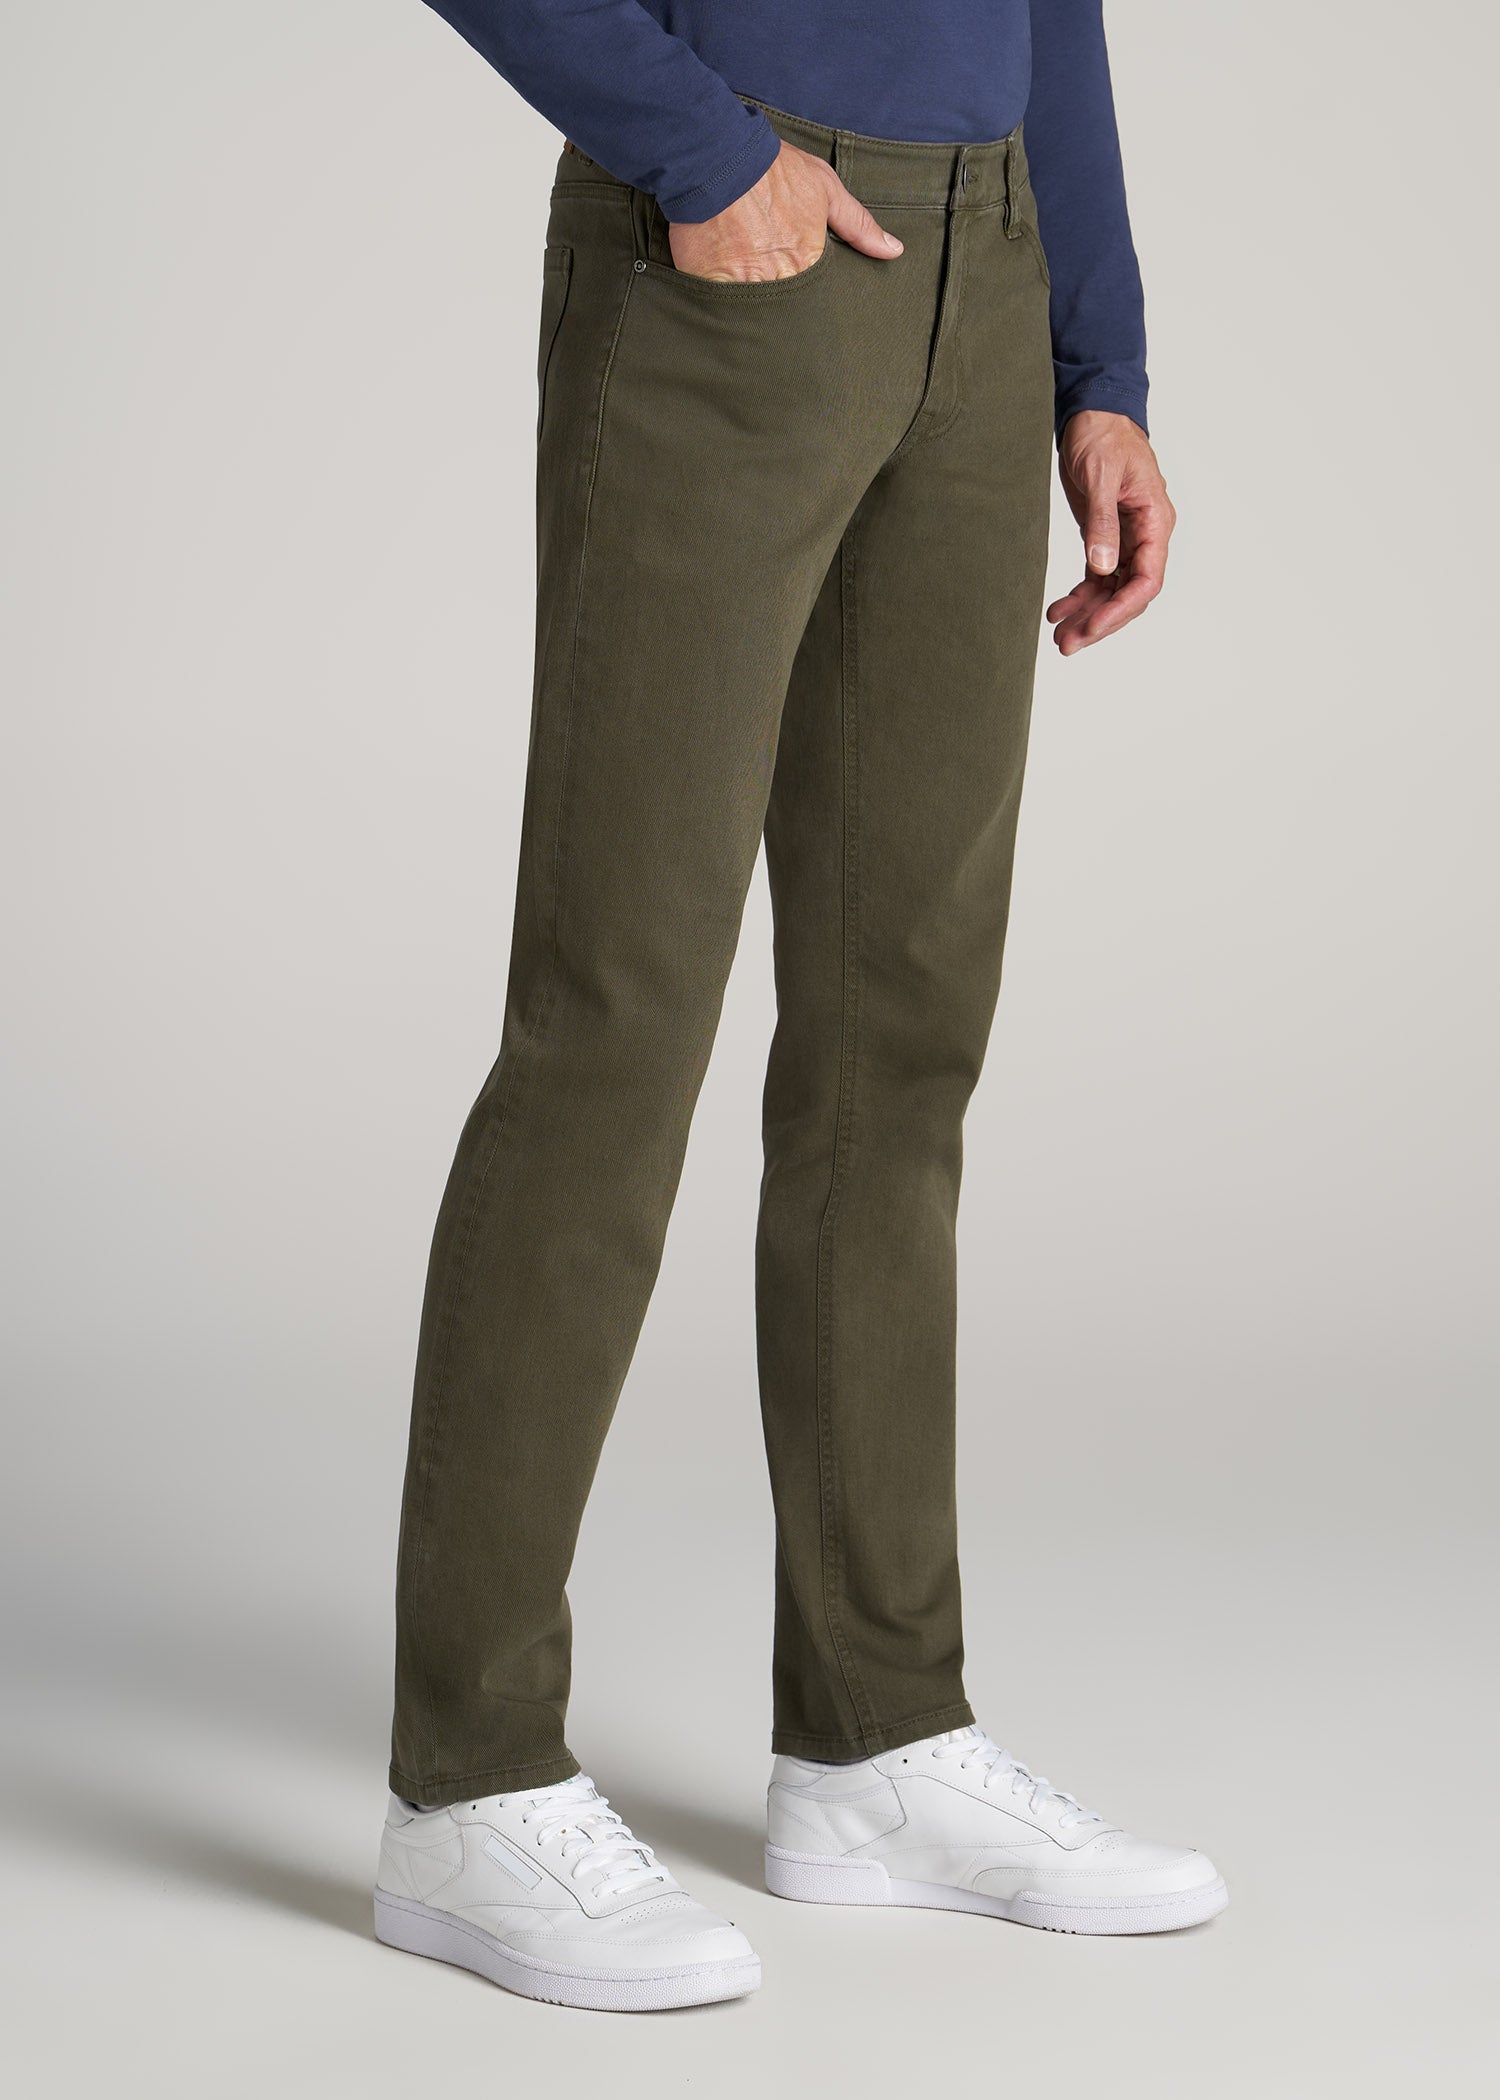 Mens Dark Olive Green 100 Linen Pants Tapered Relaxed Fit